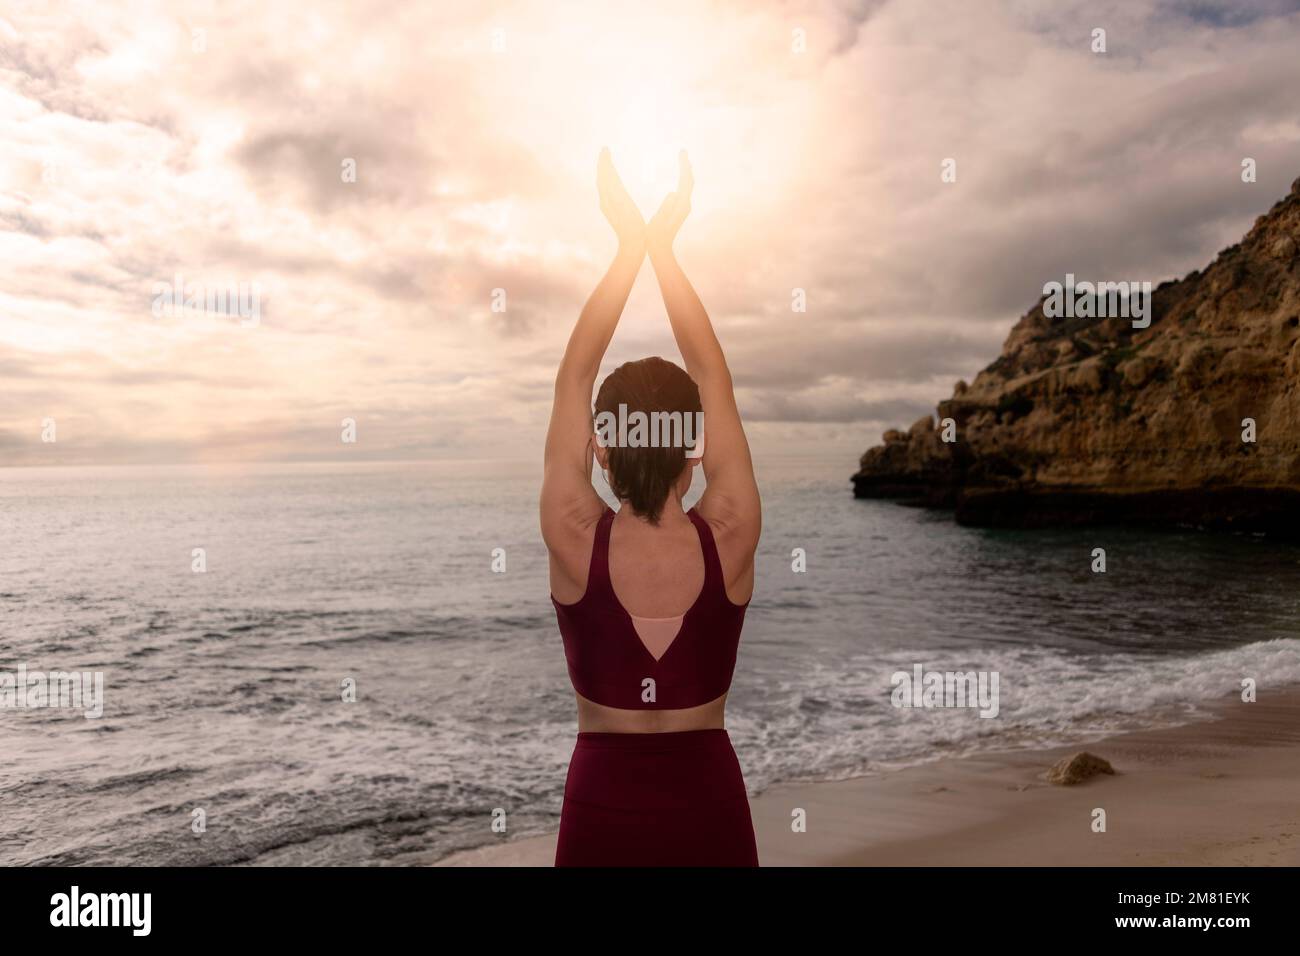 Rear view of a woman meditating cupping the sun in her hands by the sea. Stock Photo